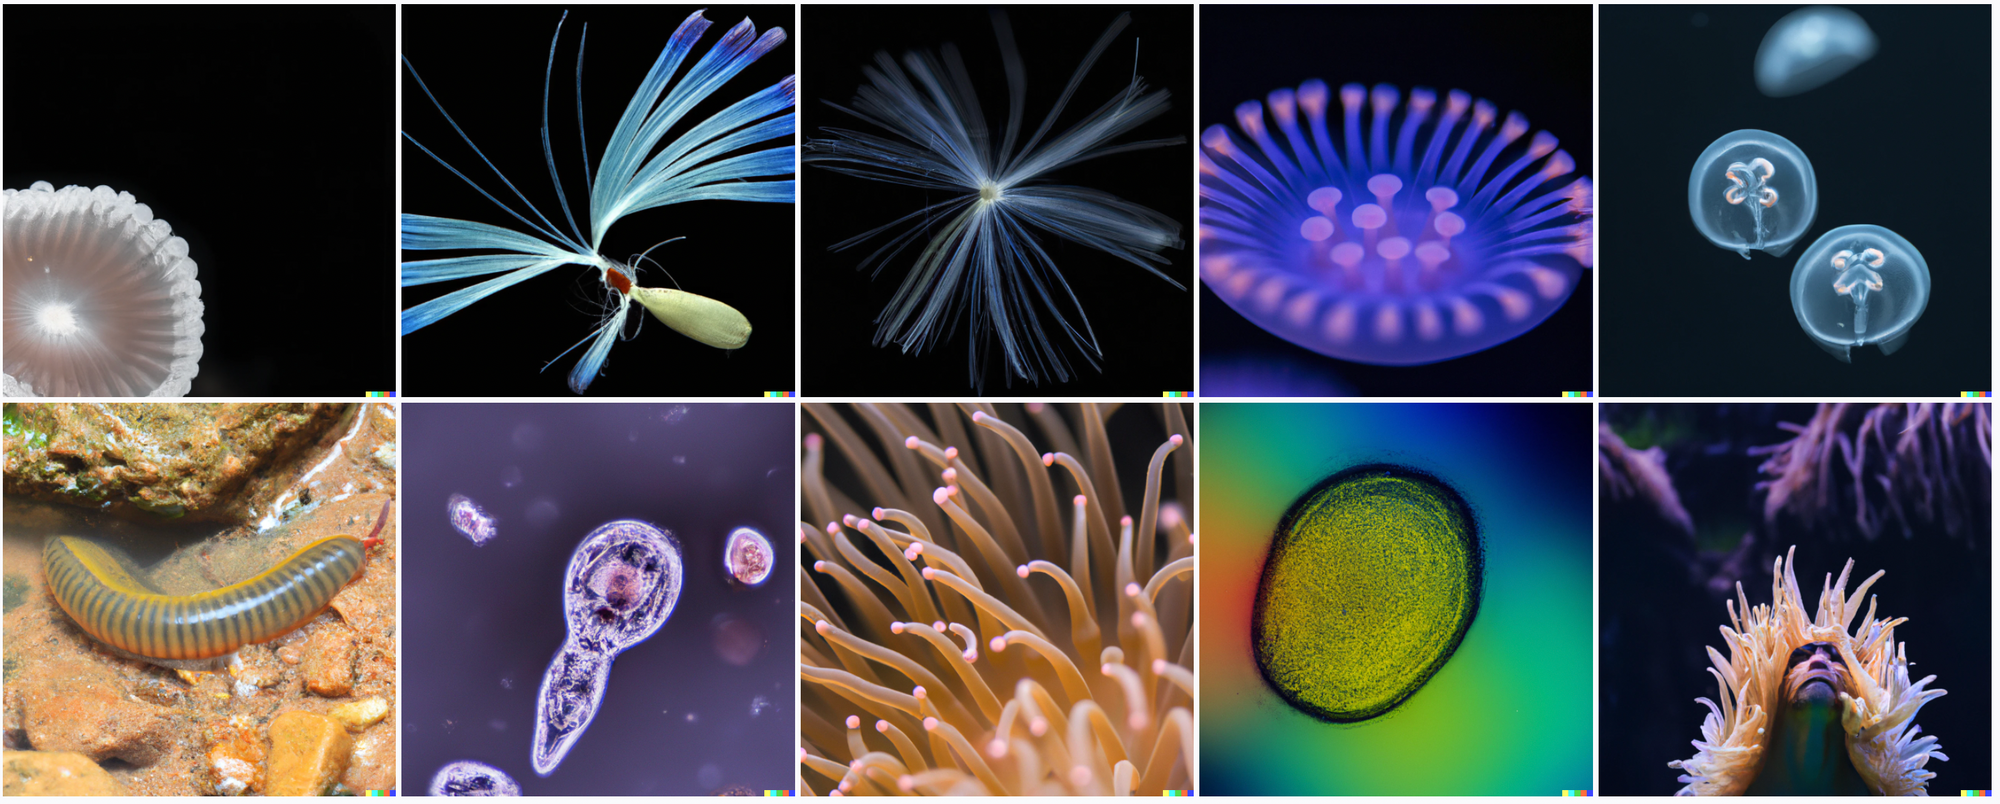 Various sea invertebrates, like anenomes and jellyfish. One anenome appears to be someone's hair